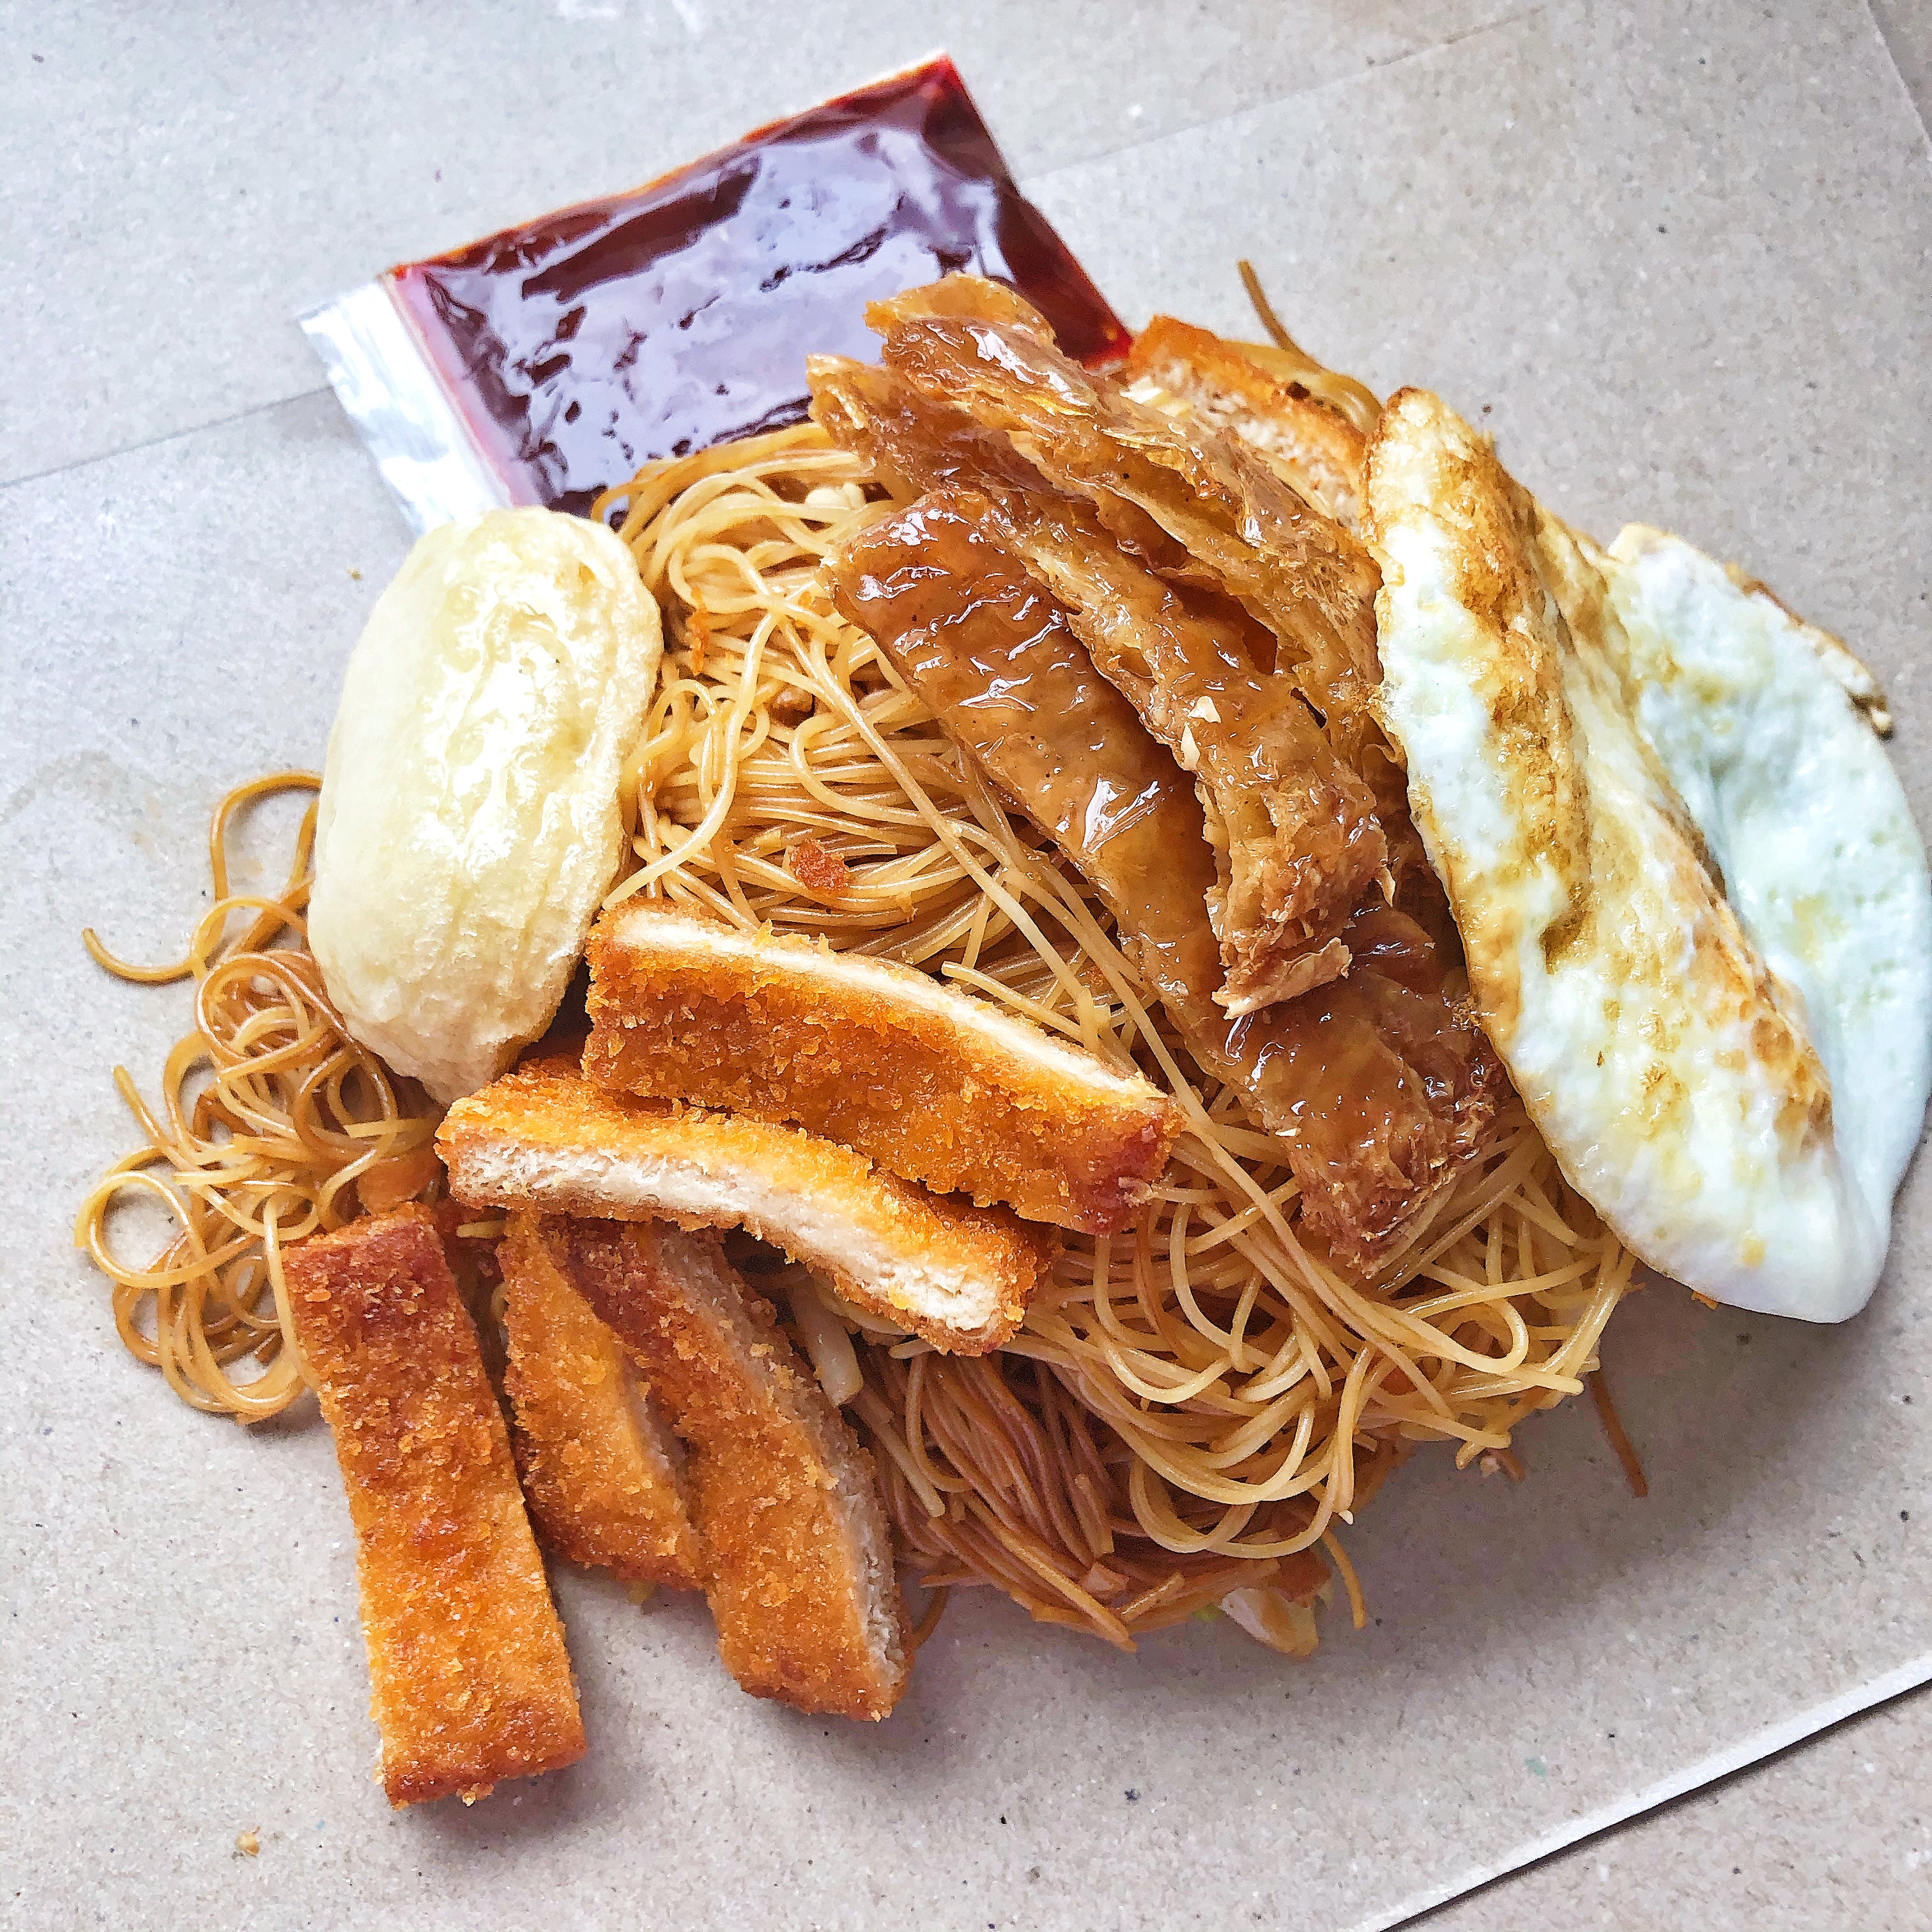 Thin rice noodles in soy sauce with fried fish cake, fish sticks and fried egg with a packet of chilli sauce